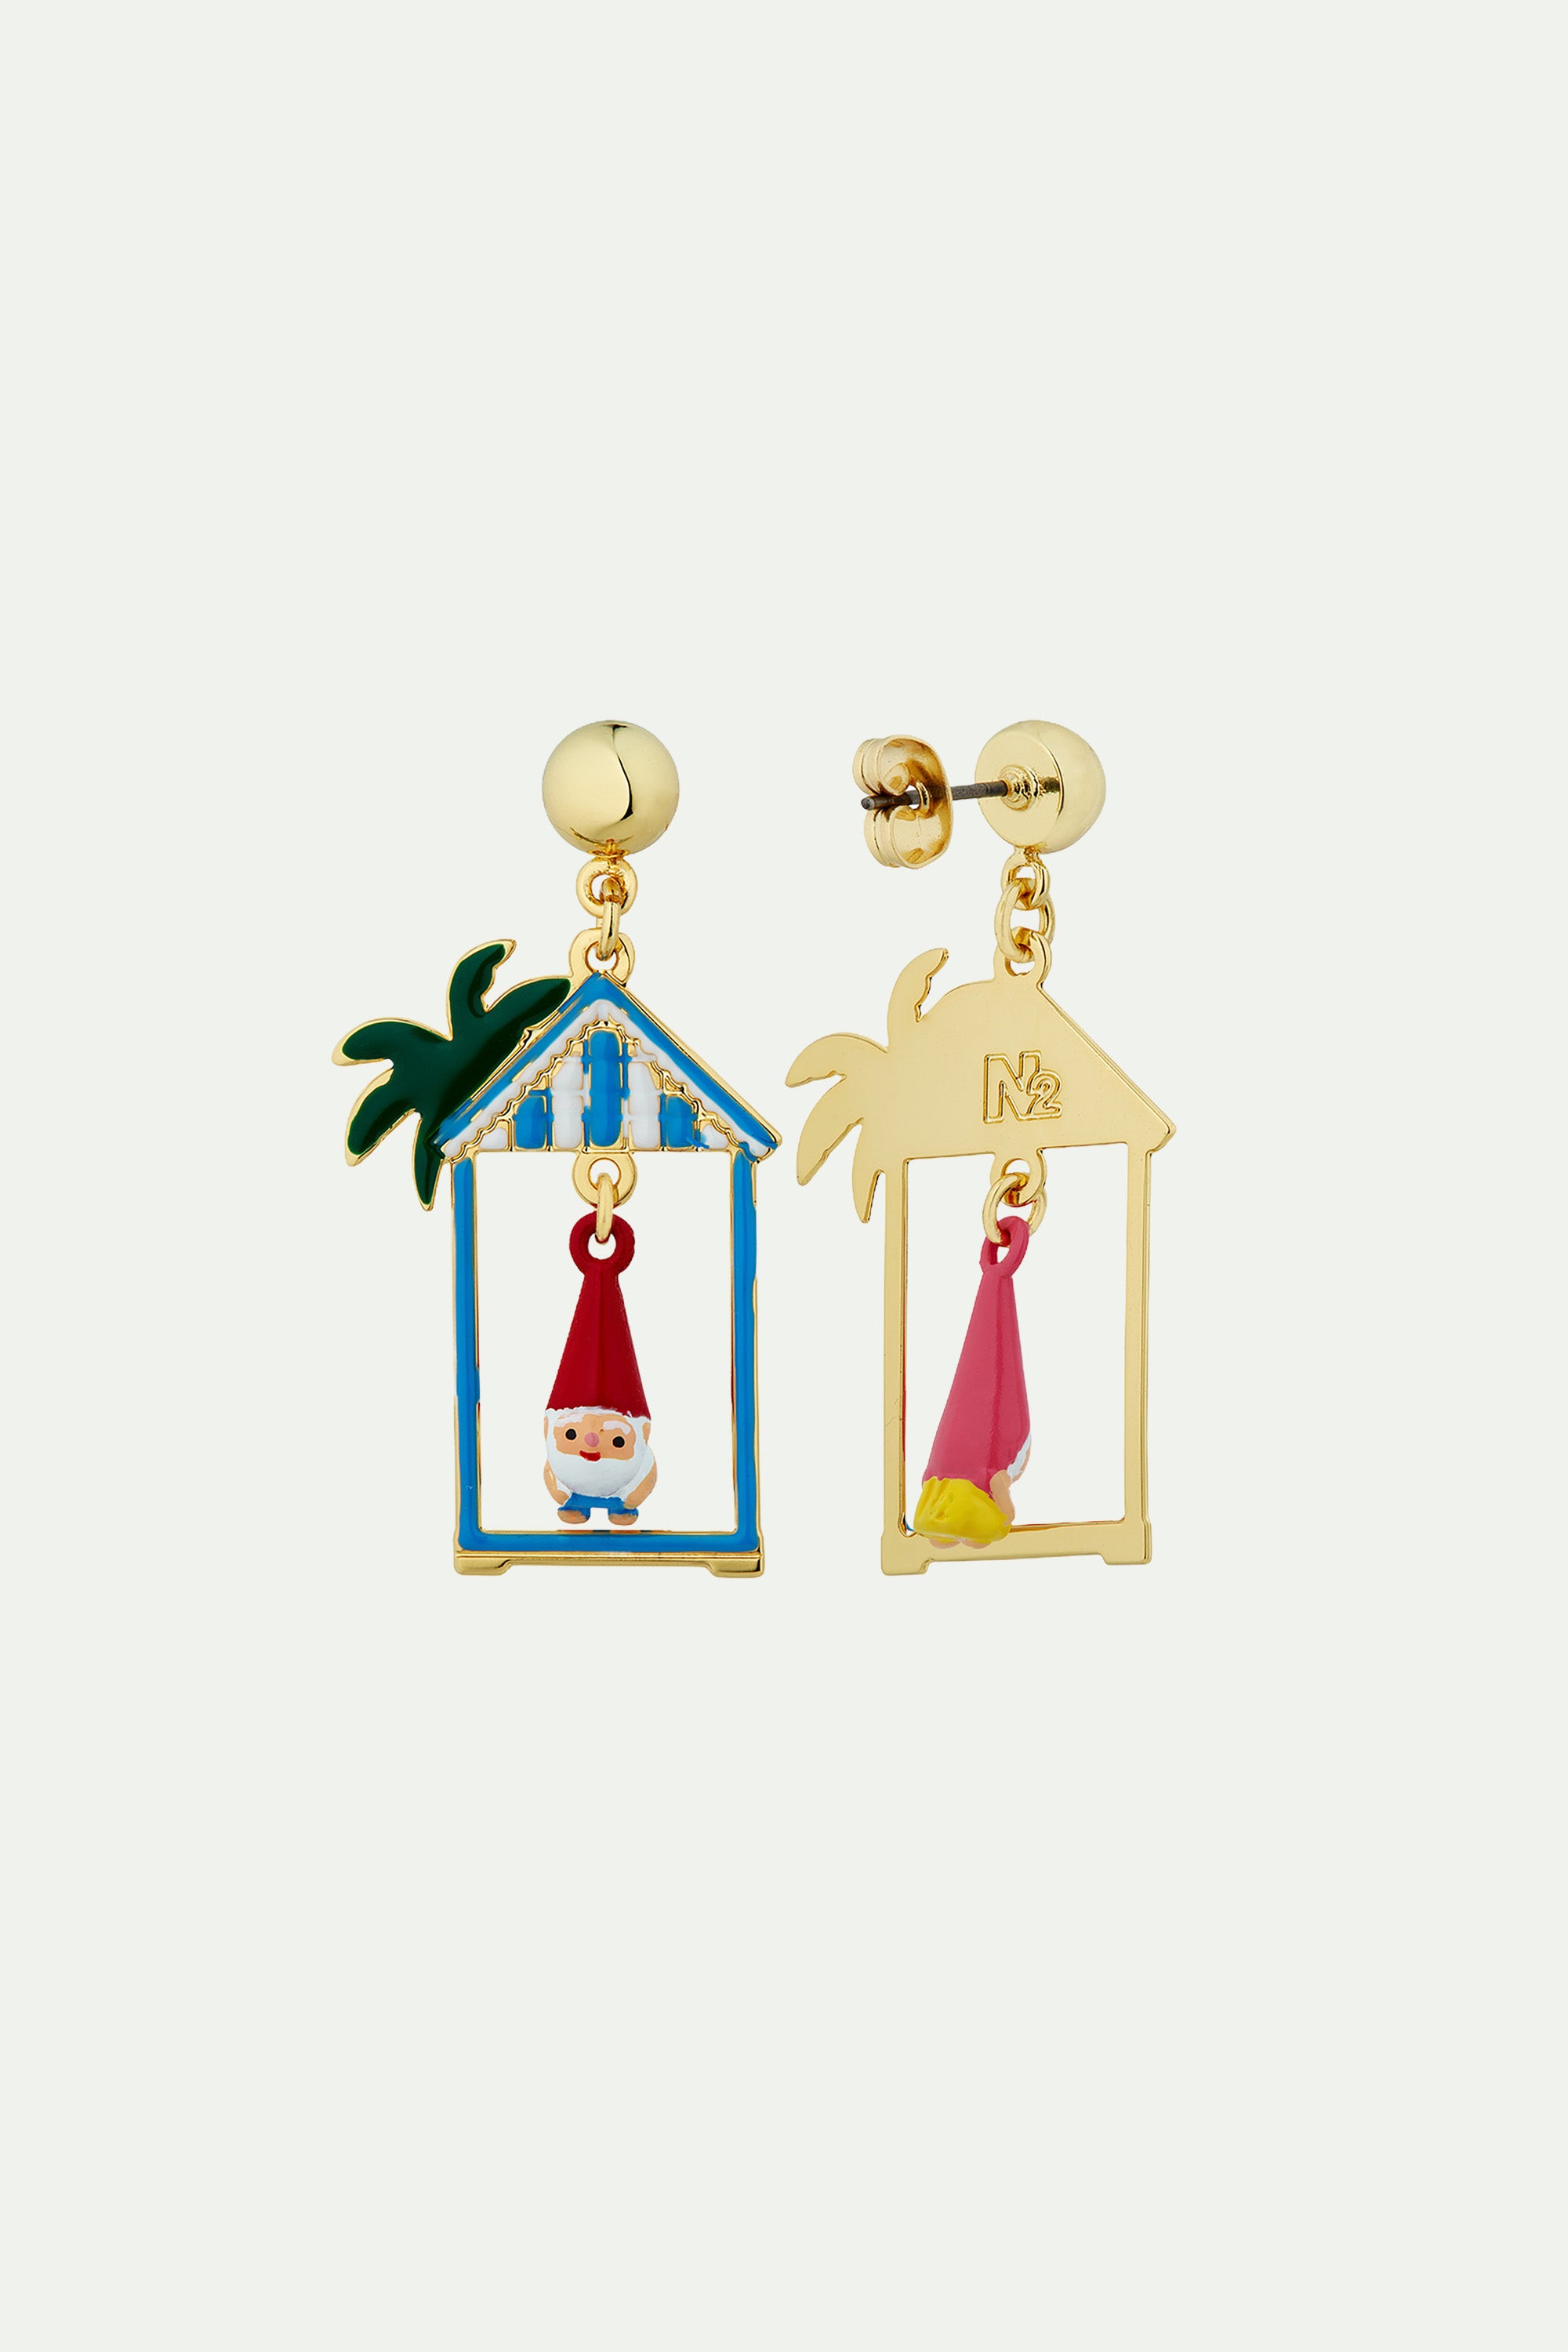 Toadstool family couple and beach hut asymmetrical post earrings